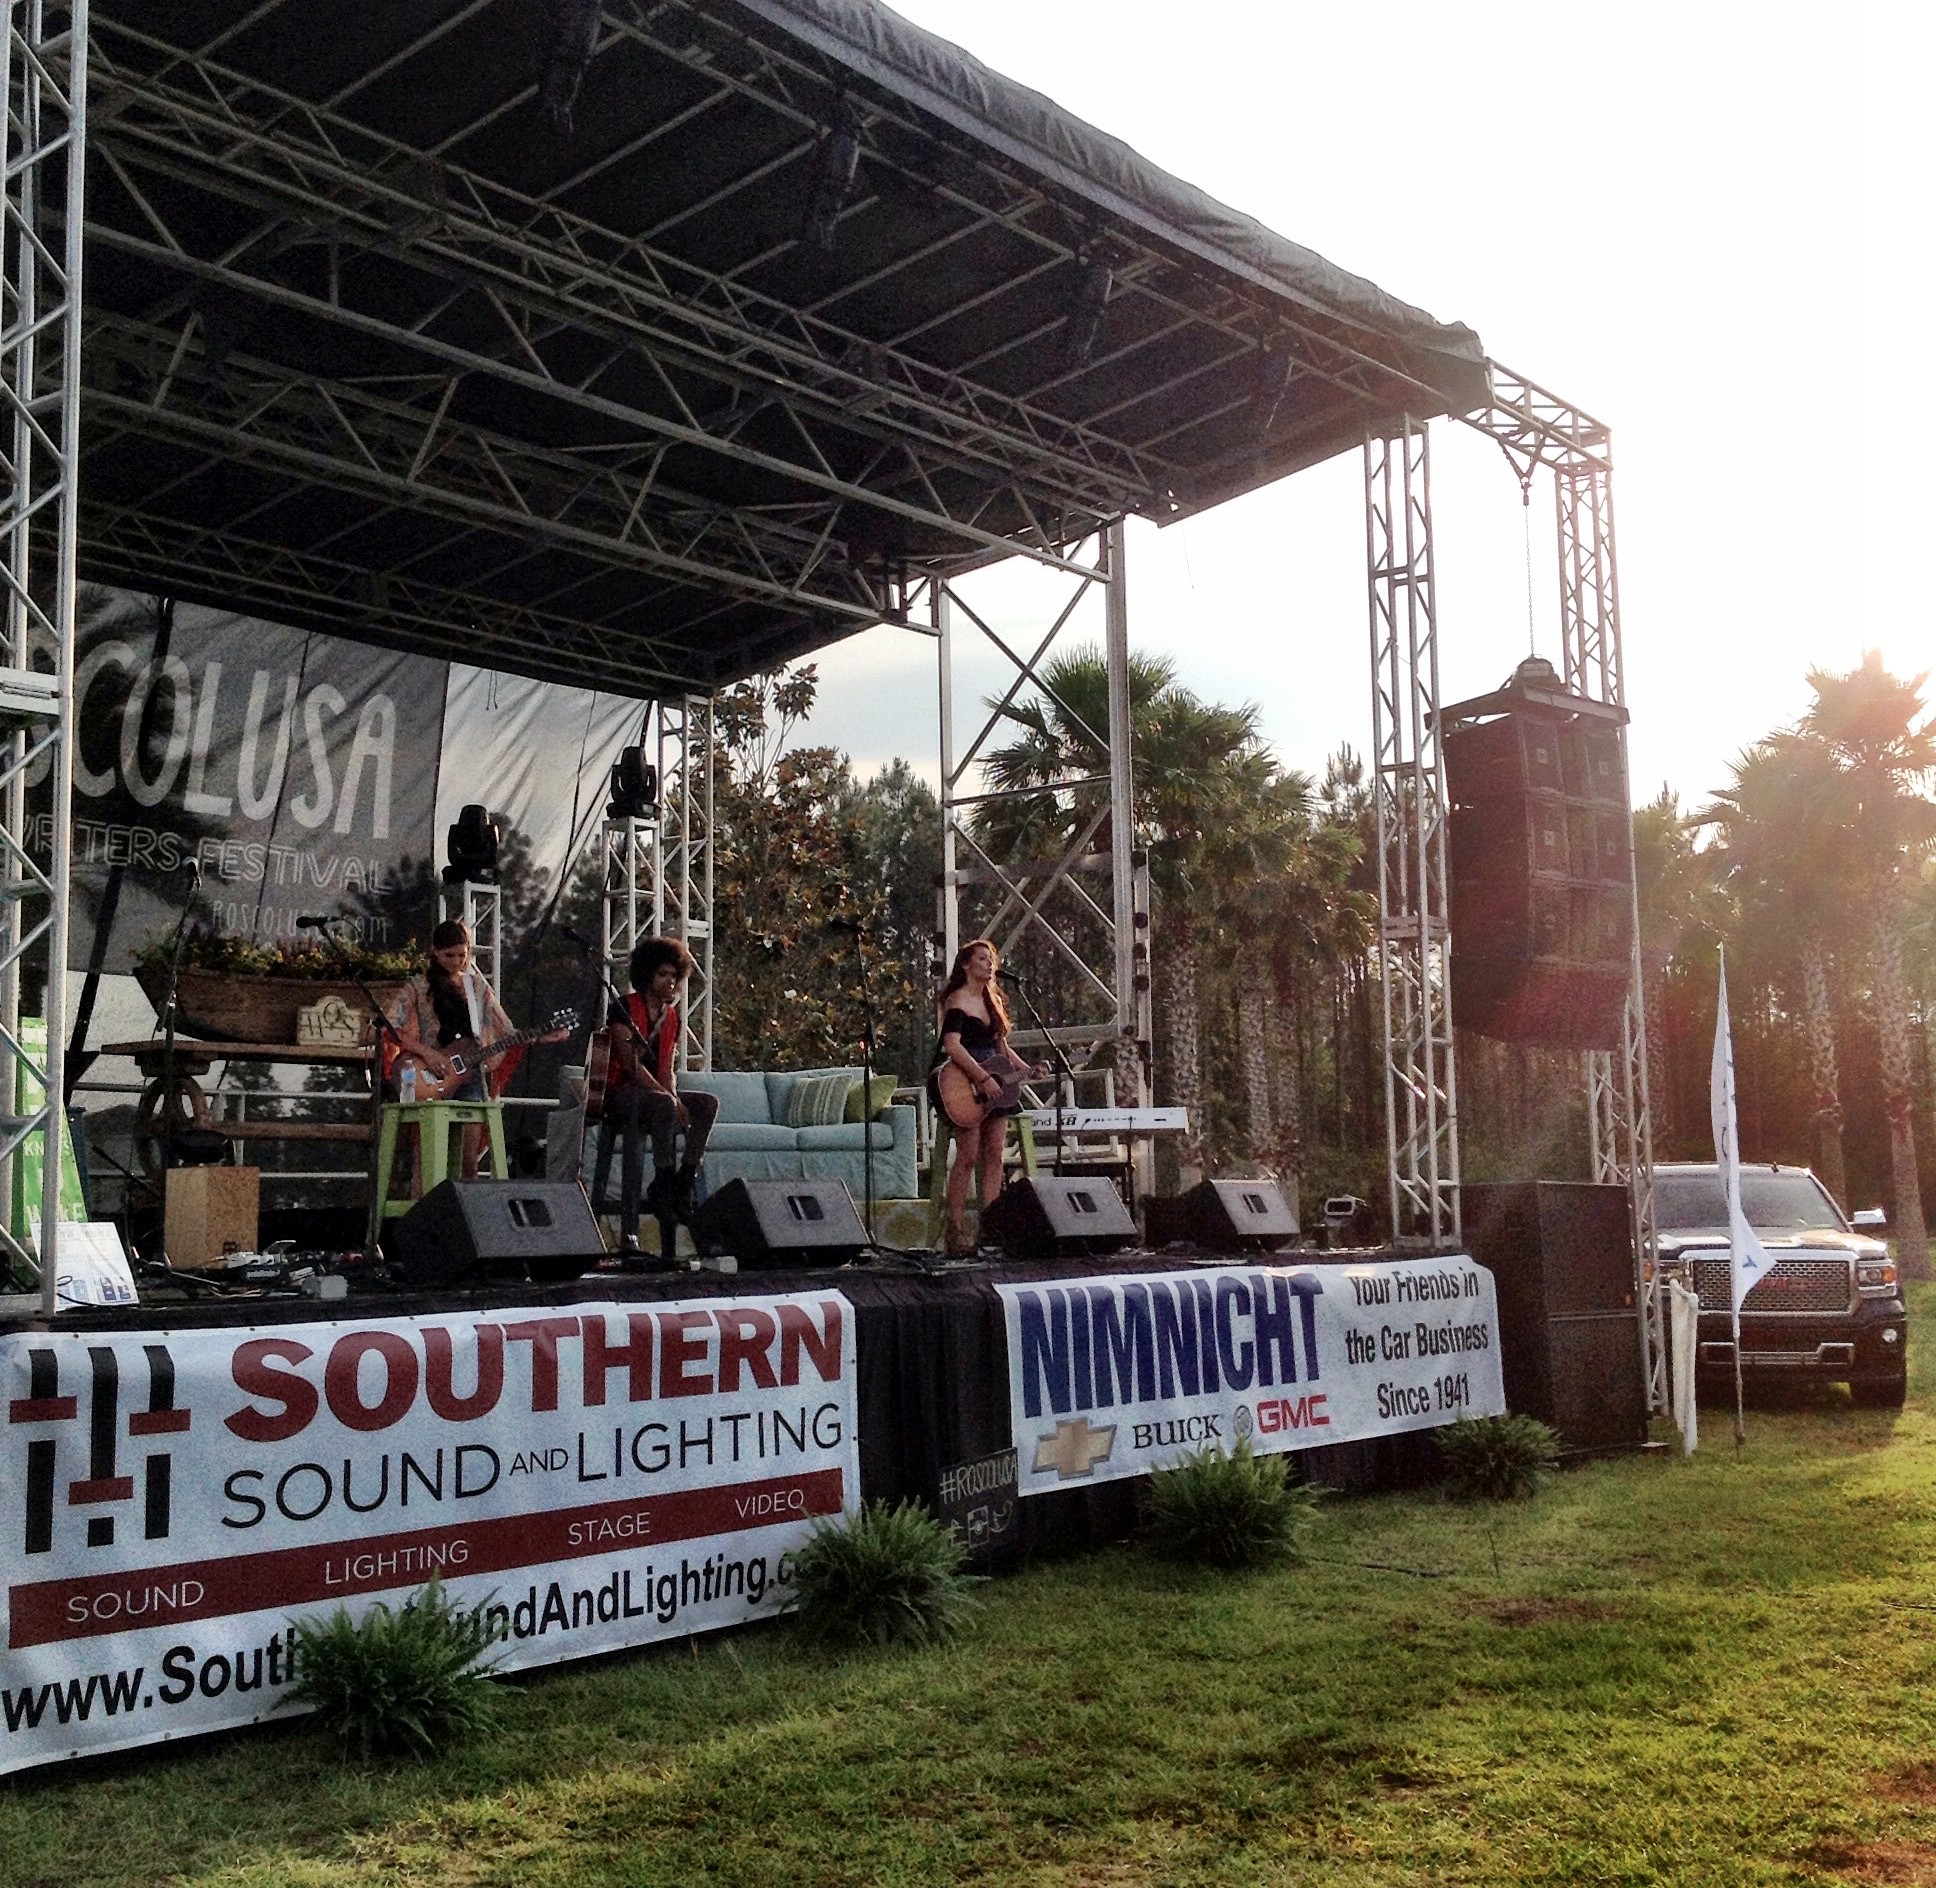 Roscolusa Songwriters Festival returns to Ponte Vedra Saturday April 23 with seven singer/songwriter performers who will share the story behind their songs. The concert takes place from 5 to 10 p.m. at the Nocatee Town Center Field.